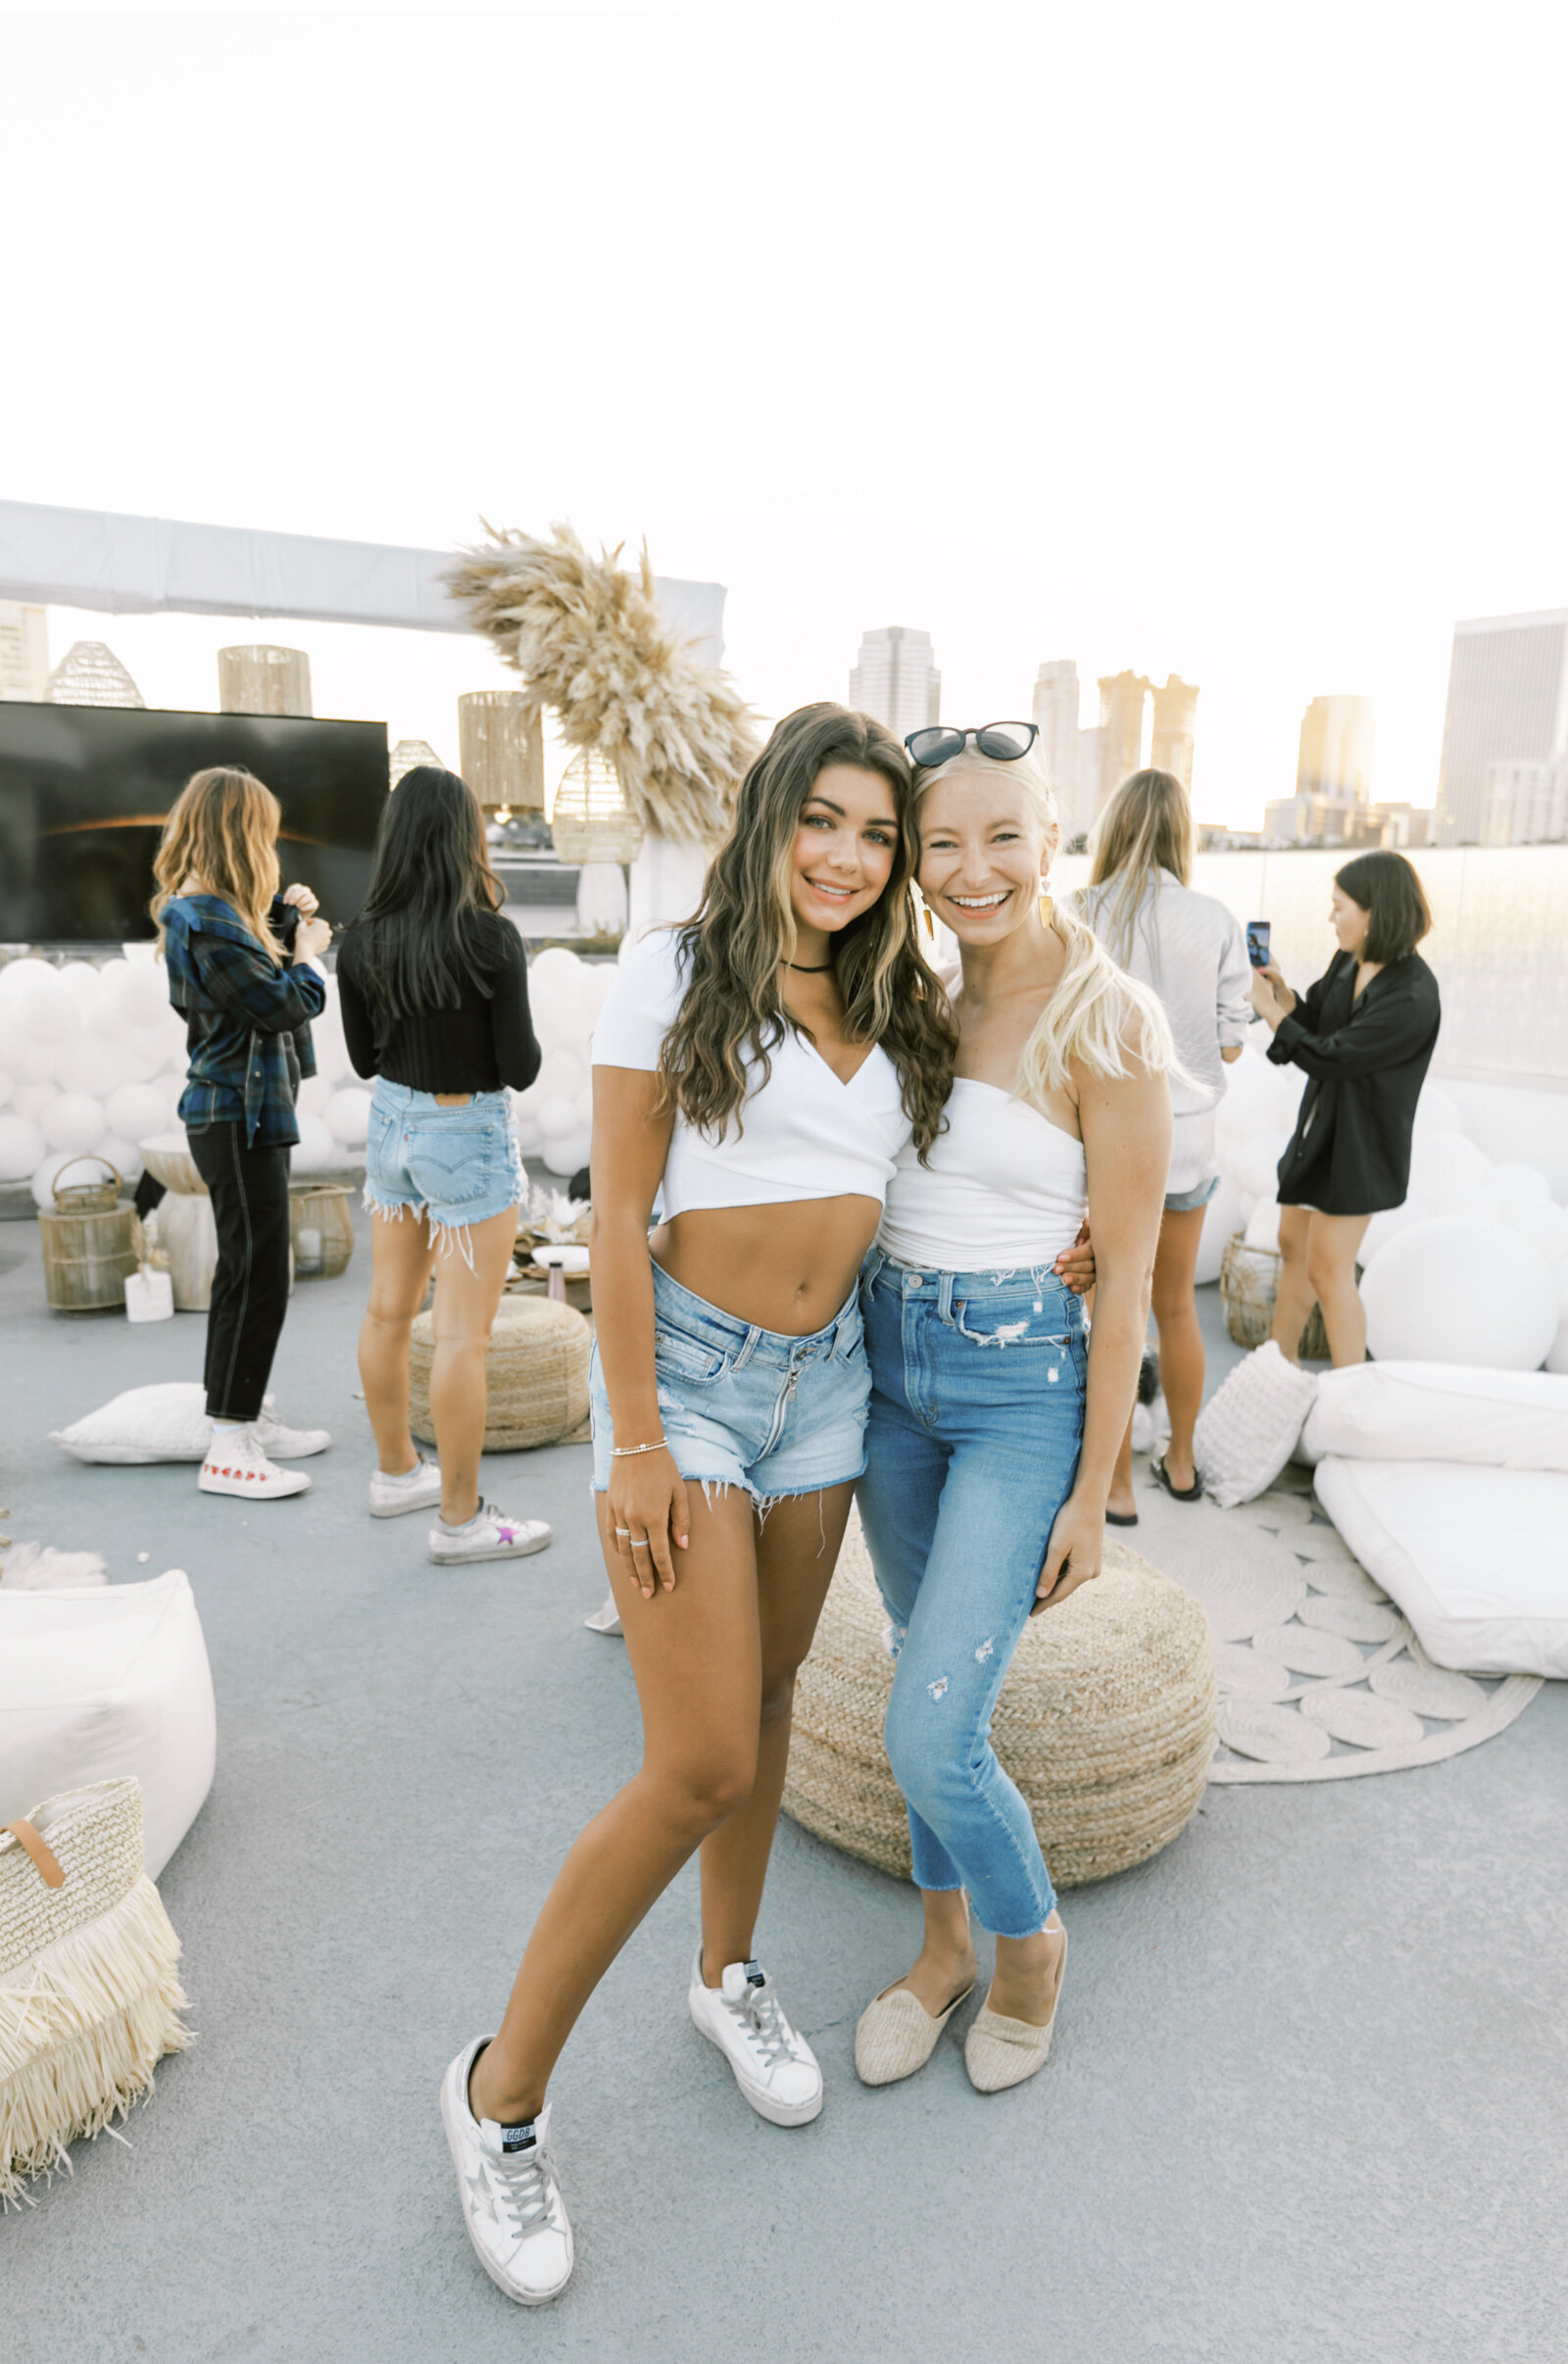 Rooftop-Movie-Night-LA-Rooftops-Movie-Event-Ideas-The-Bachelor-Contestant-Natalie-Schutt-photography_07.jpg